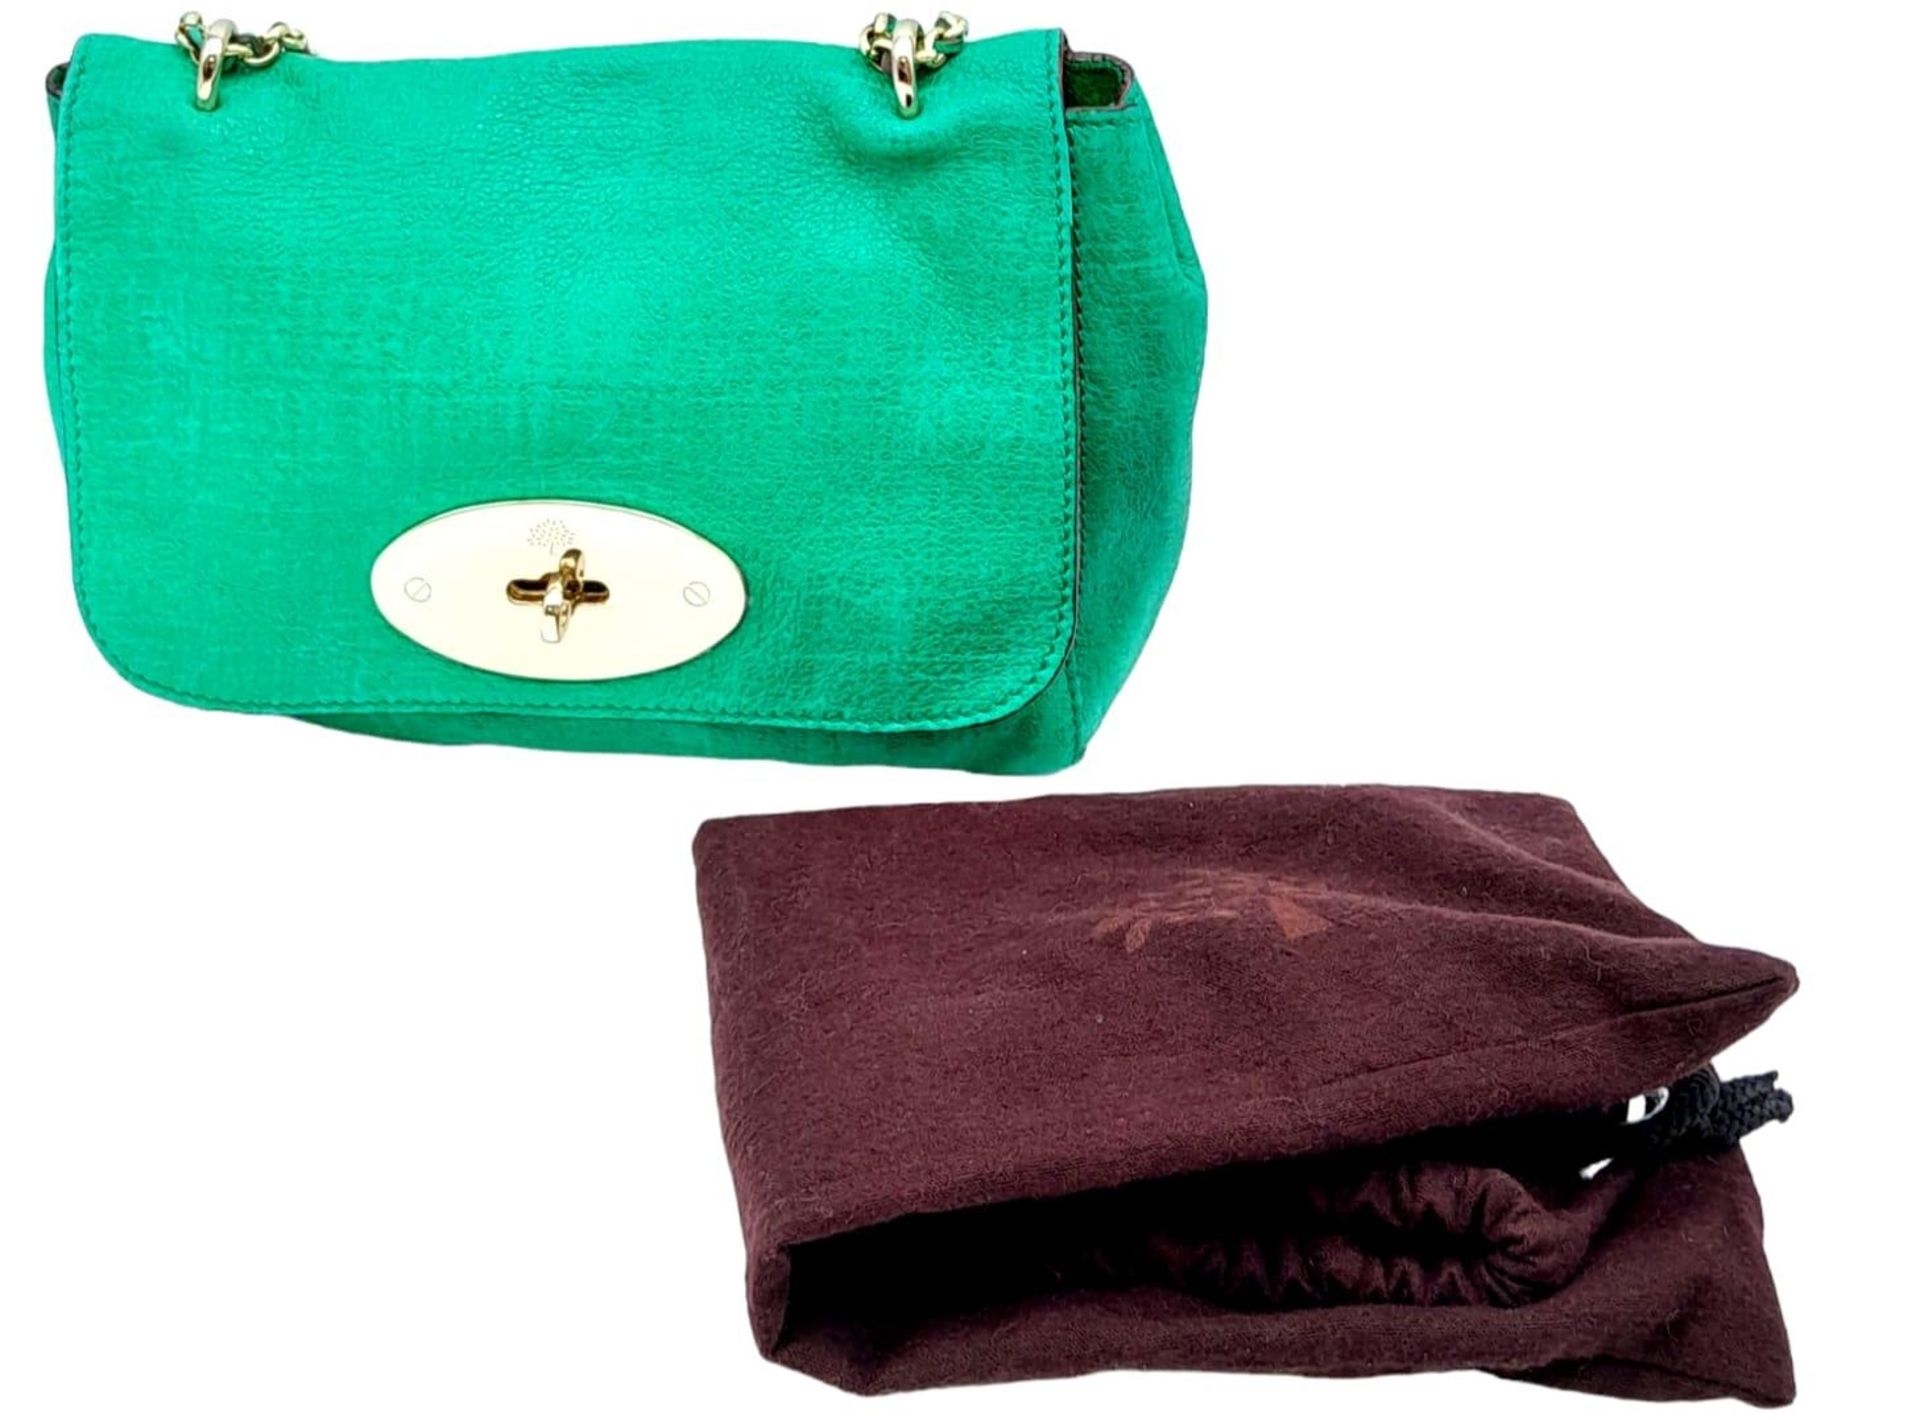 A green Mulberry Lily mini bag with gold tone hardware and matching strap. Size approx. 20x18x8cm. - Image 2 of 9